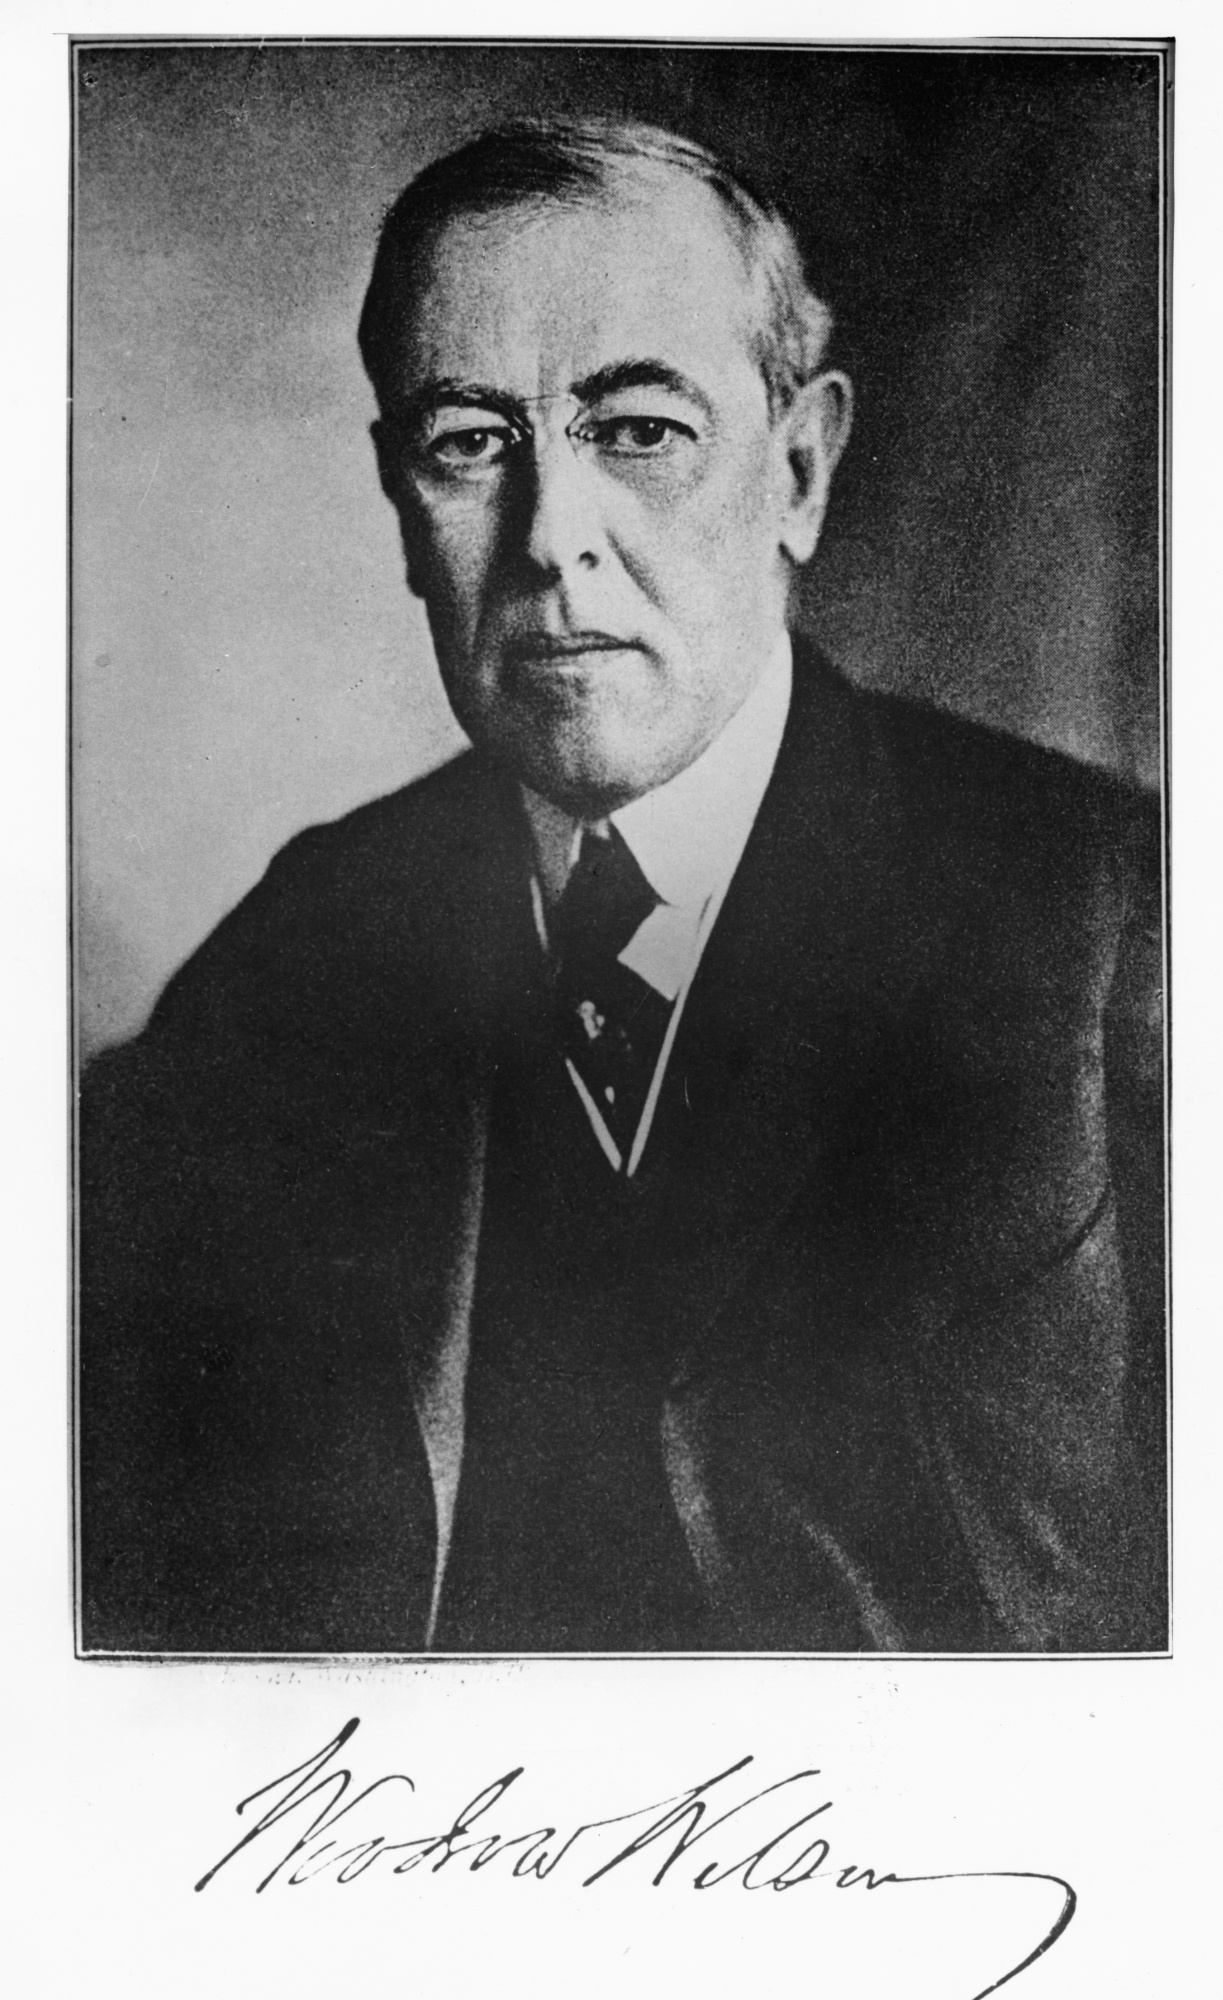 A portrait of former US president Woodrow Wilson. The photo is signed by him.